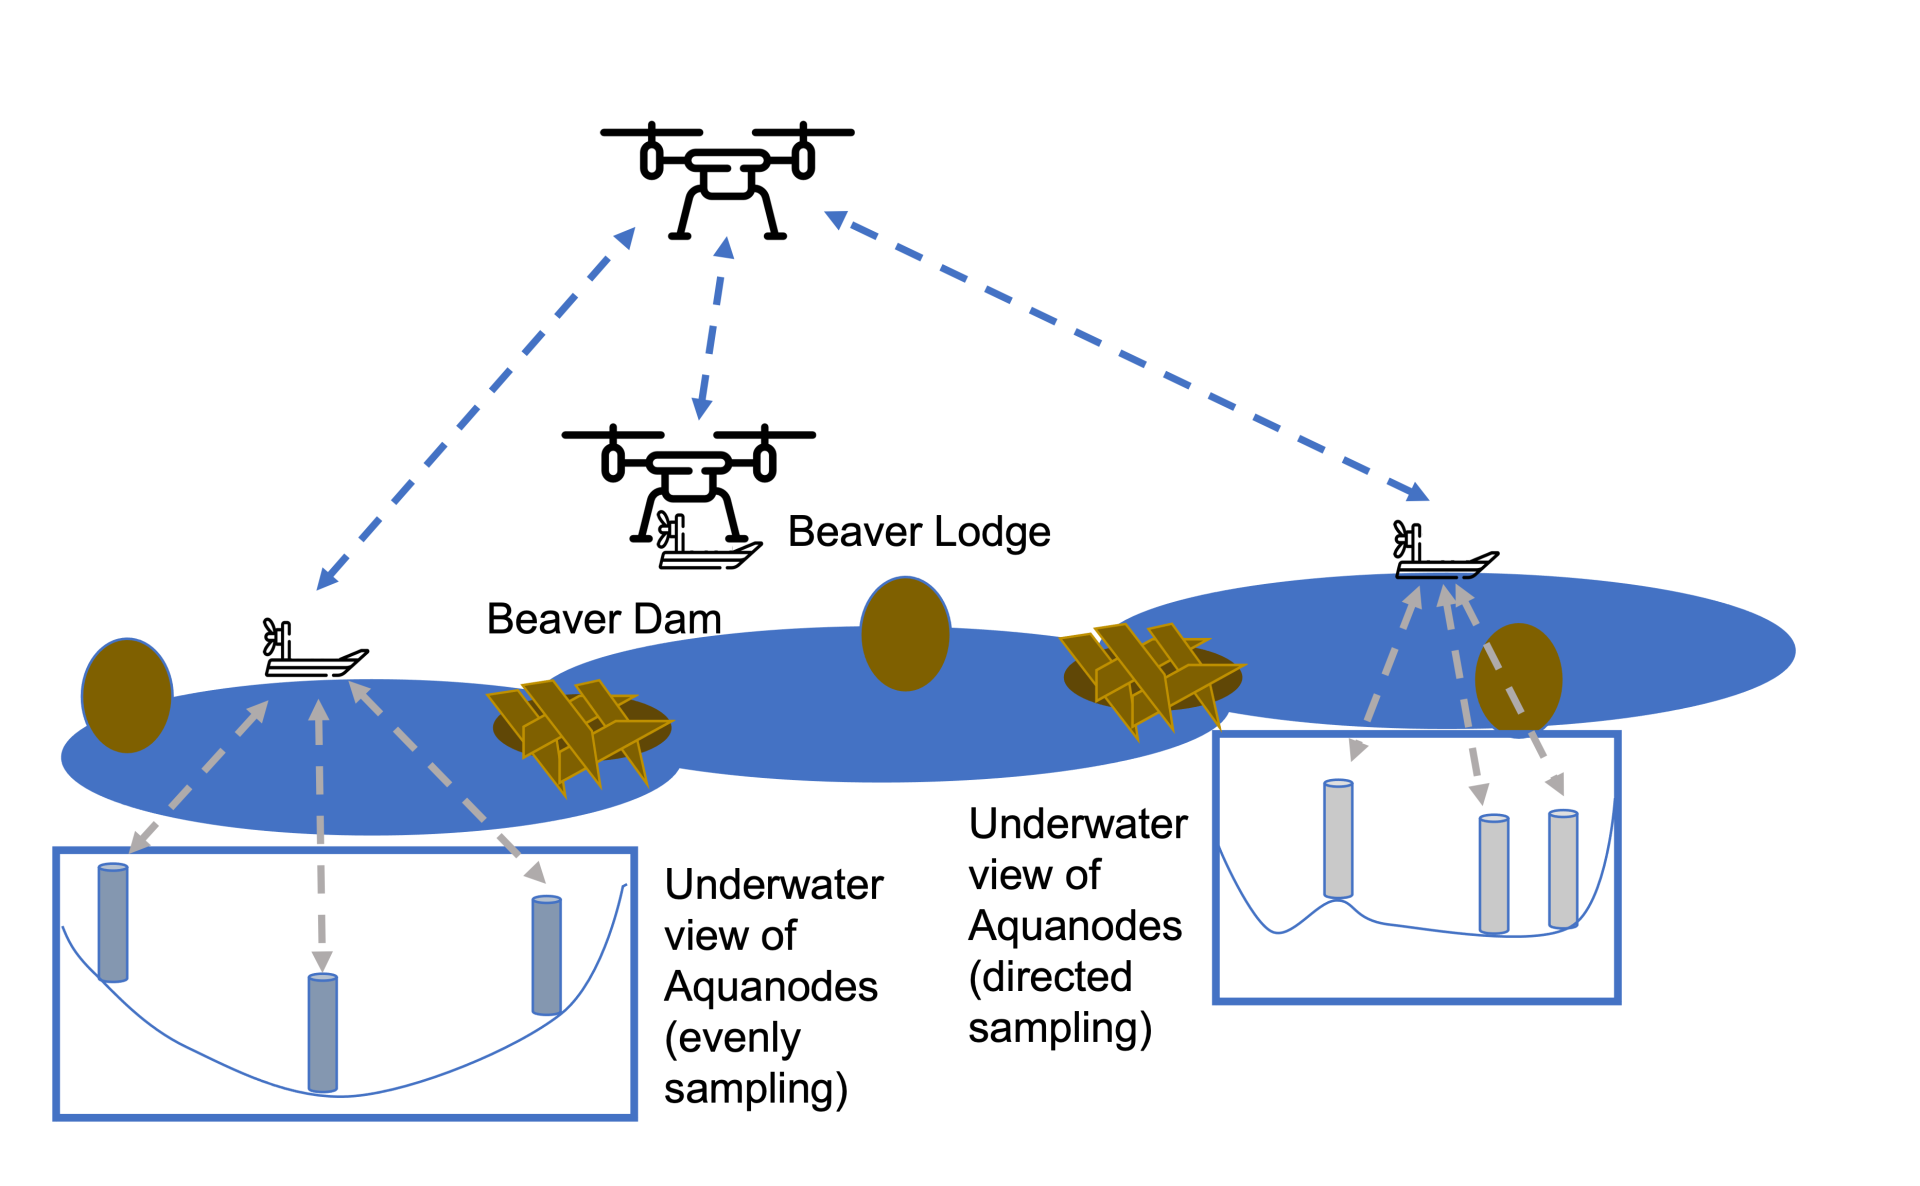 Expected UxS interactions showing multiple disconnected waterways, each robot platform, and potential sampling areas of interest.